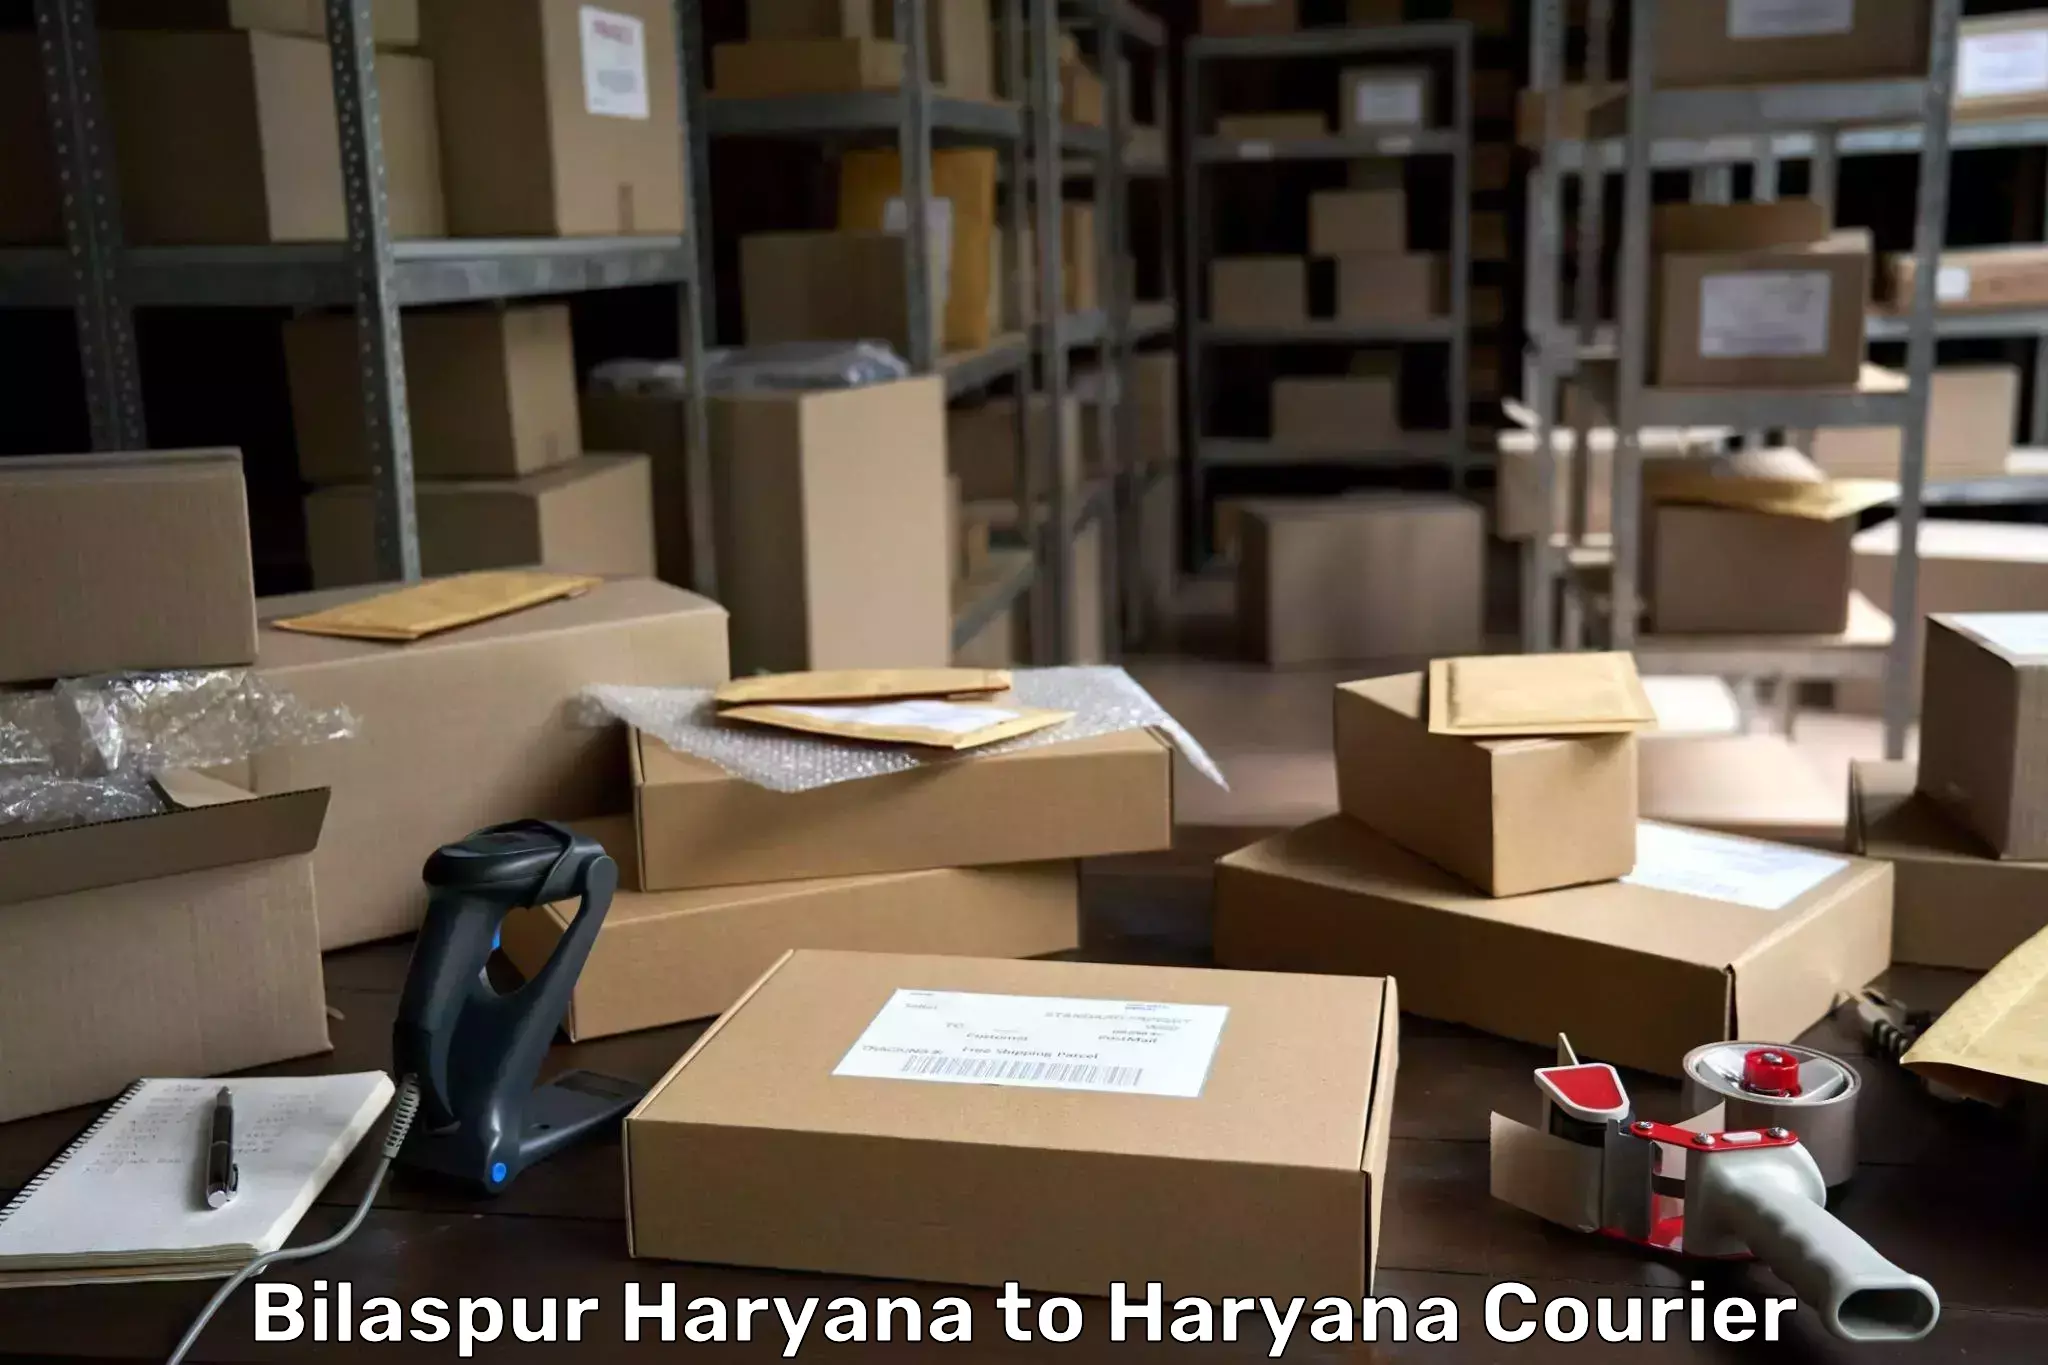 Reliable parcel services Bilaspur Haryana to Sonipat